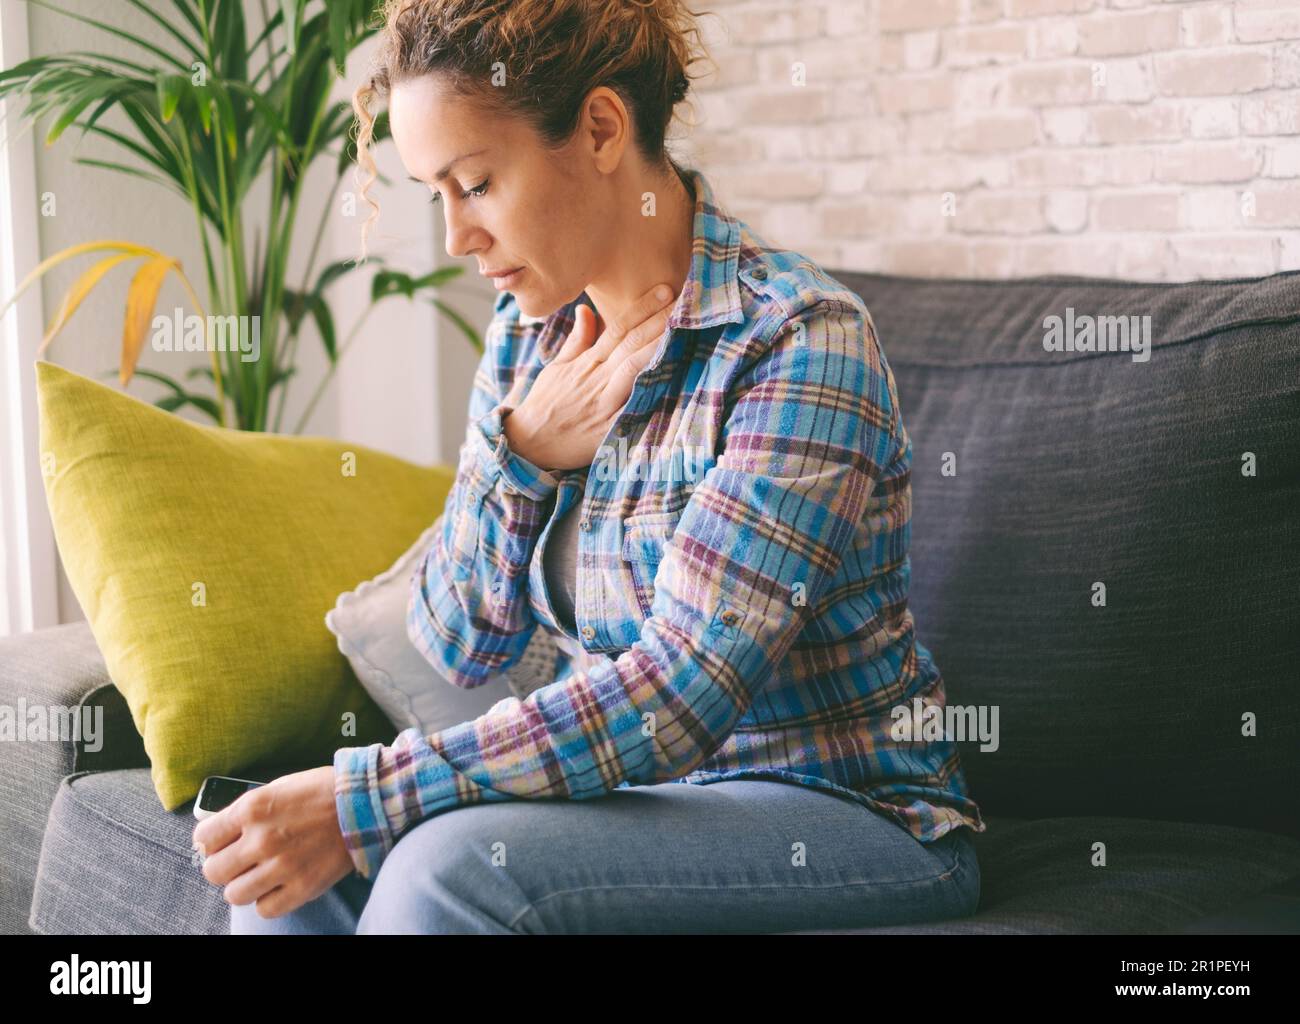 Pressure in the chest. Close-up photo of a stressed woman who is suffering from a chest pain and touching her heart area. People health bad condition and fear. One female touching chest worried Stock Photo